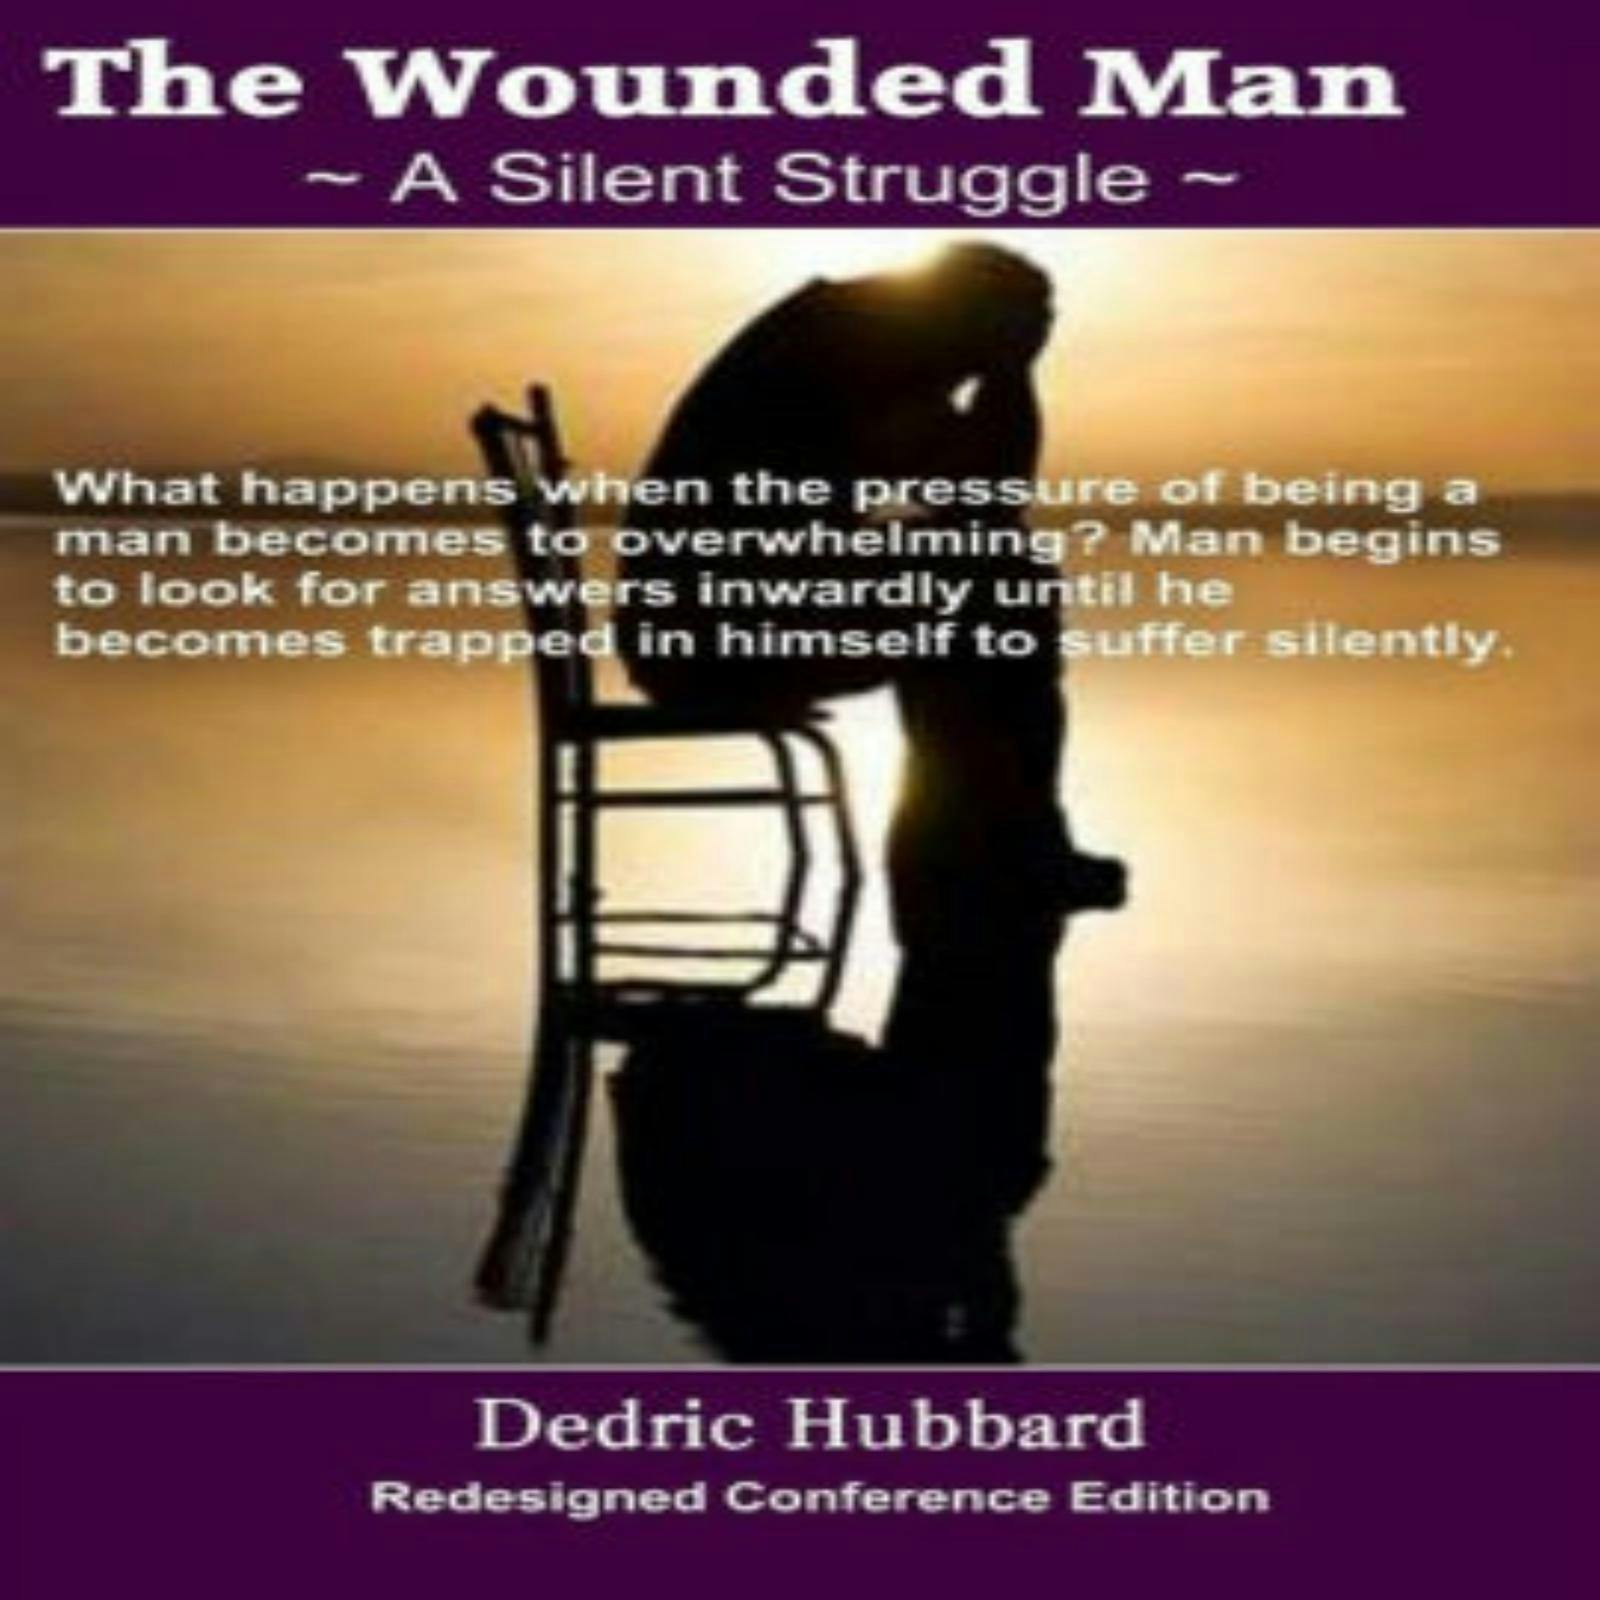 The Wounded Man: A Silent Struggle - Dedric Hubbard